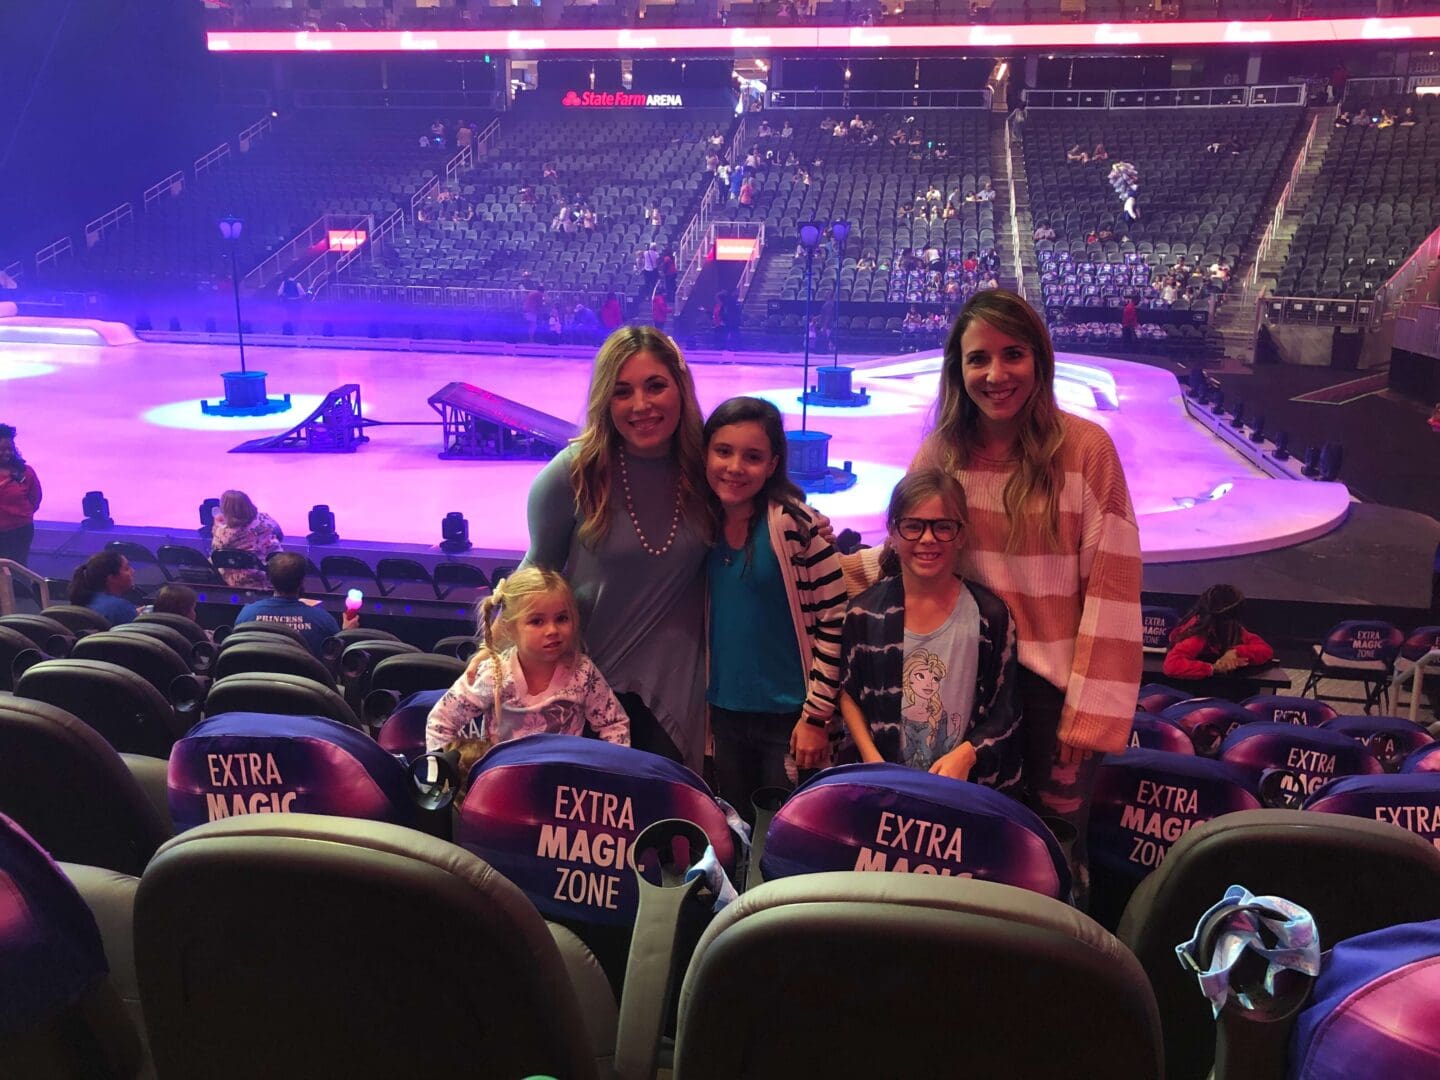 State Farm arena - disney on ice atlanta attractions for families